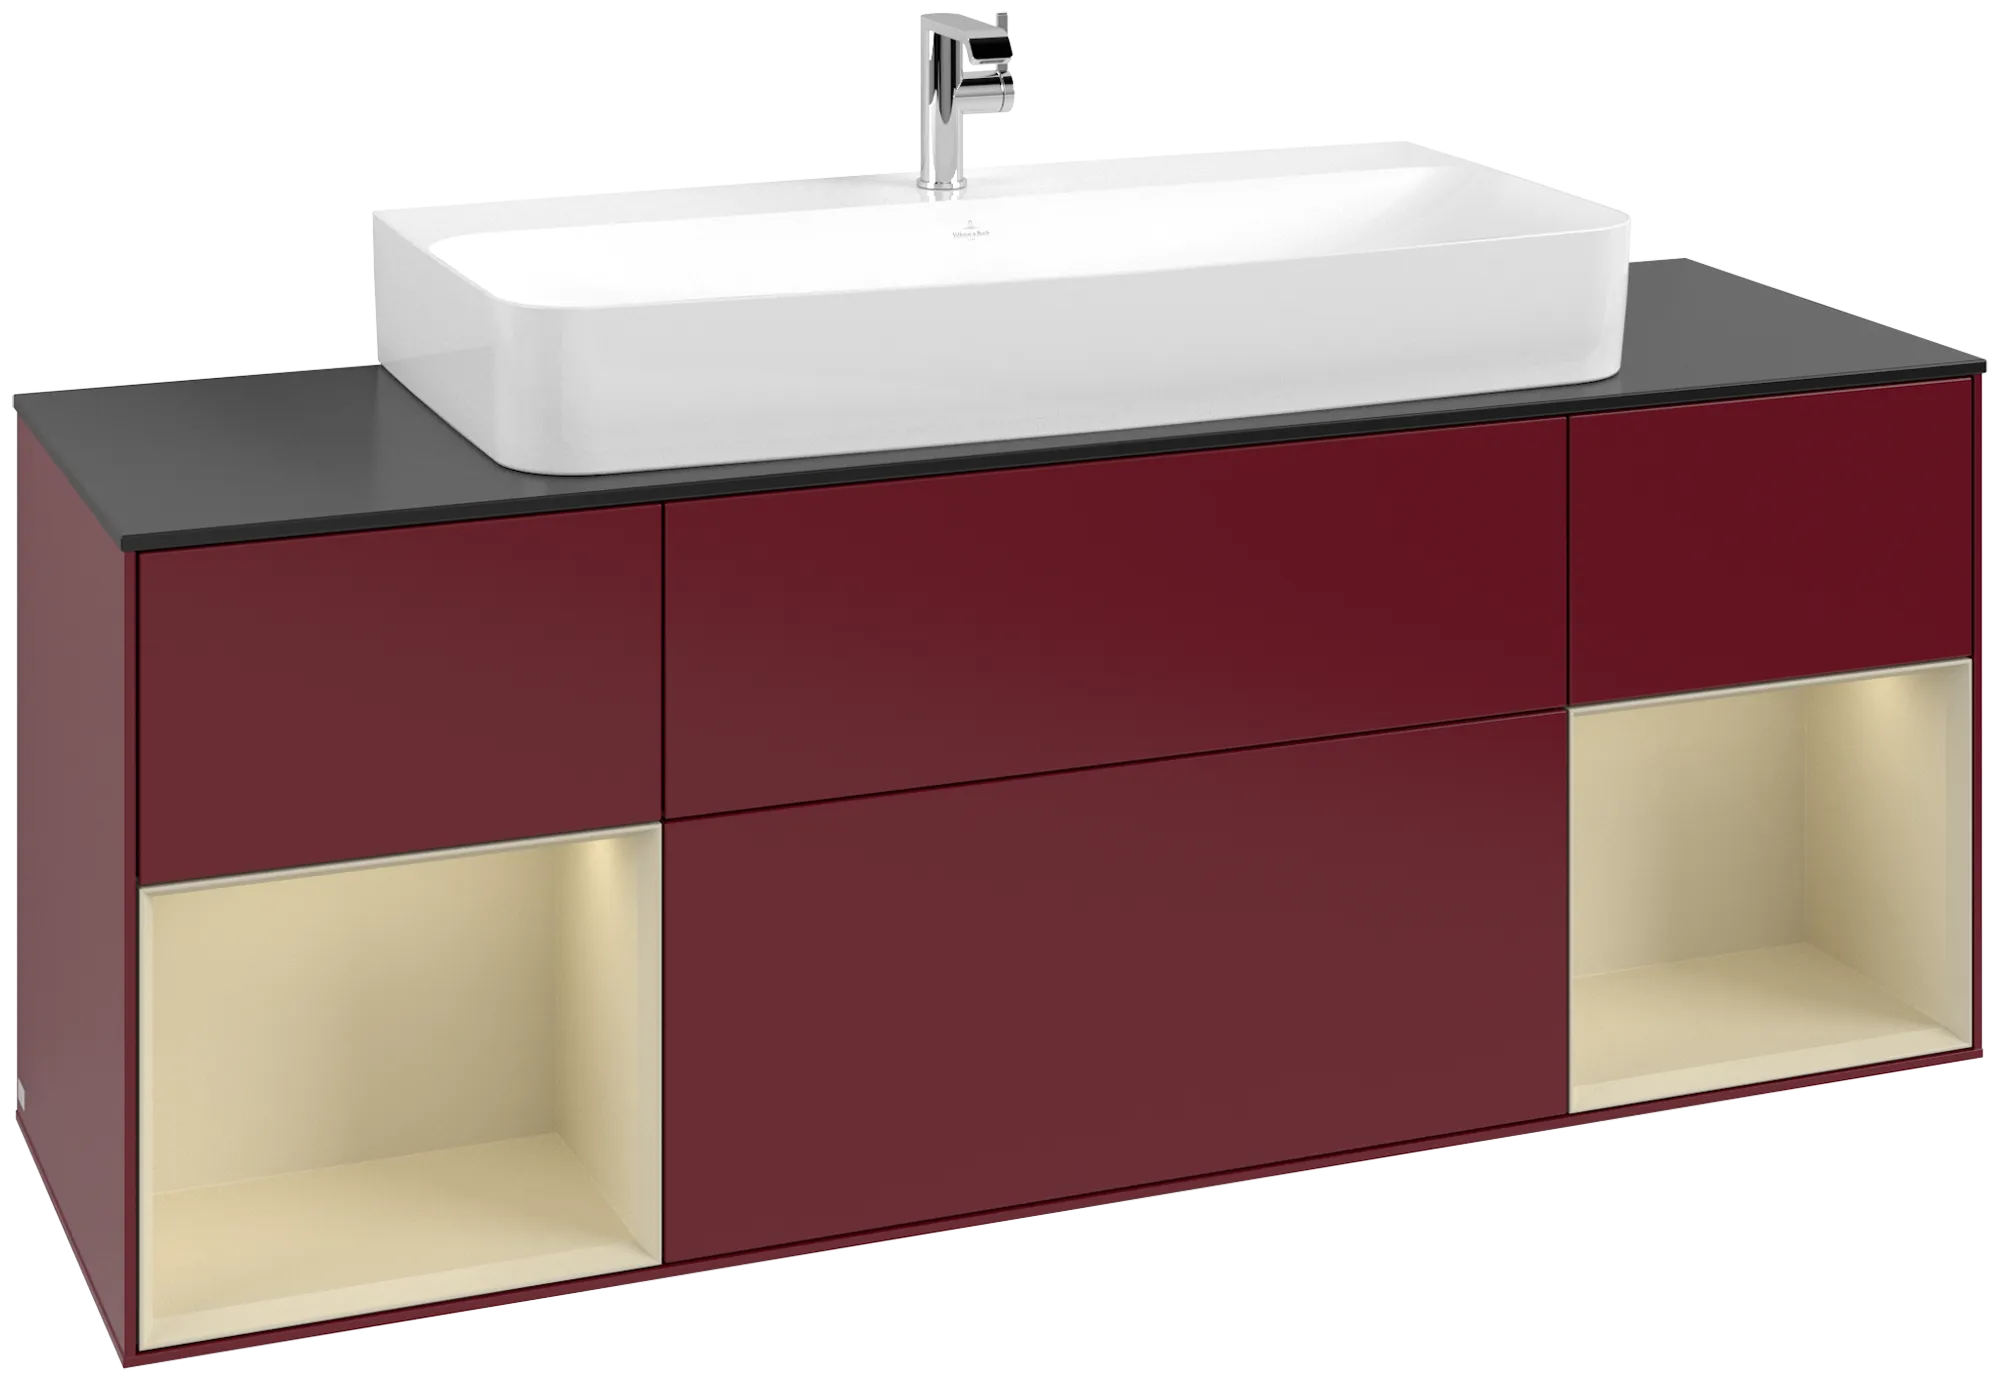 Picture of VILLEROY BOCH Finion Vanity unit, with lighting, 4 pull-out compartments, 1600 x 603 x 501 mm, Peony Matt Lacquer / Silk Grey Matt Lacquer / Glass Black Matt #G212HJHB